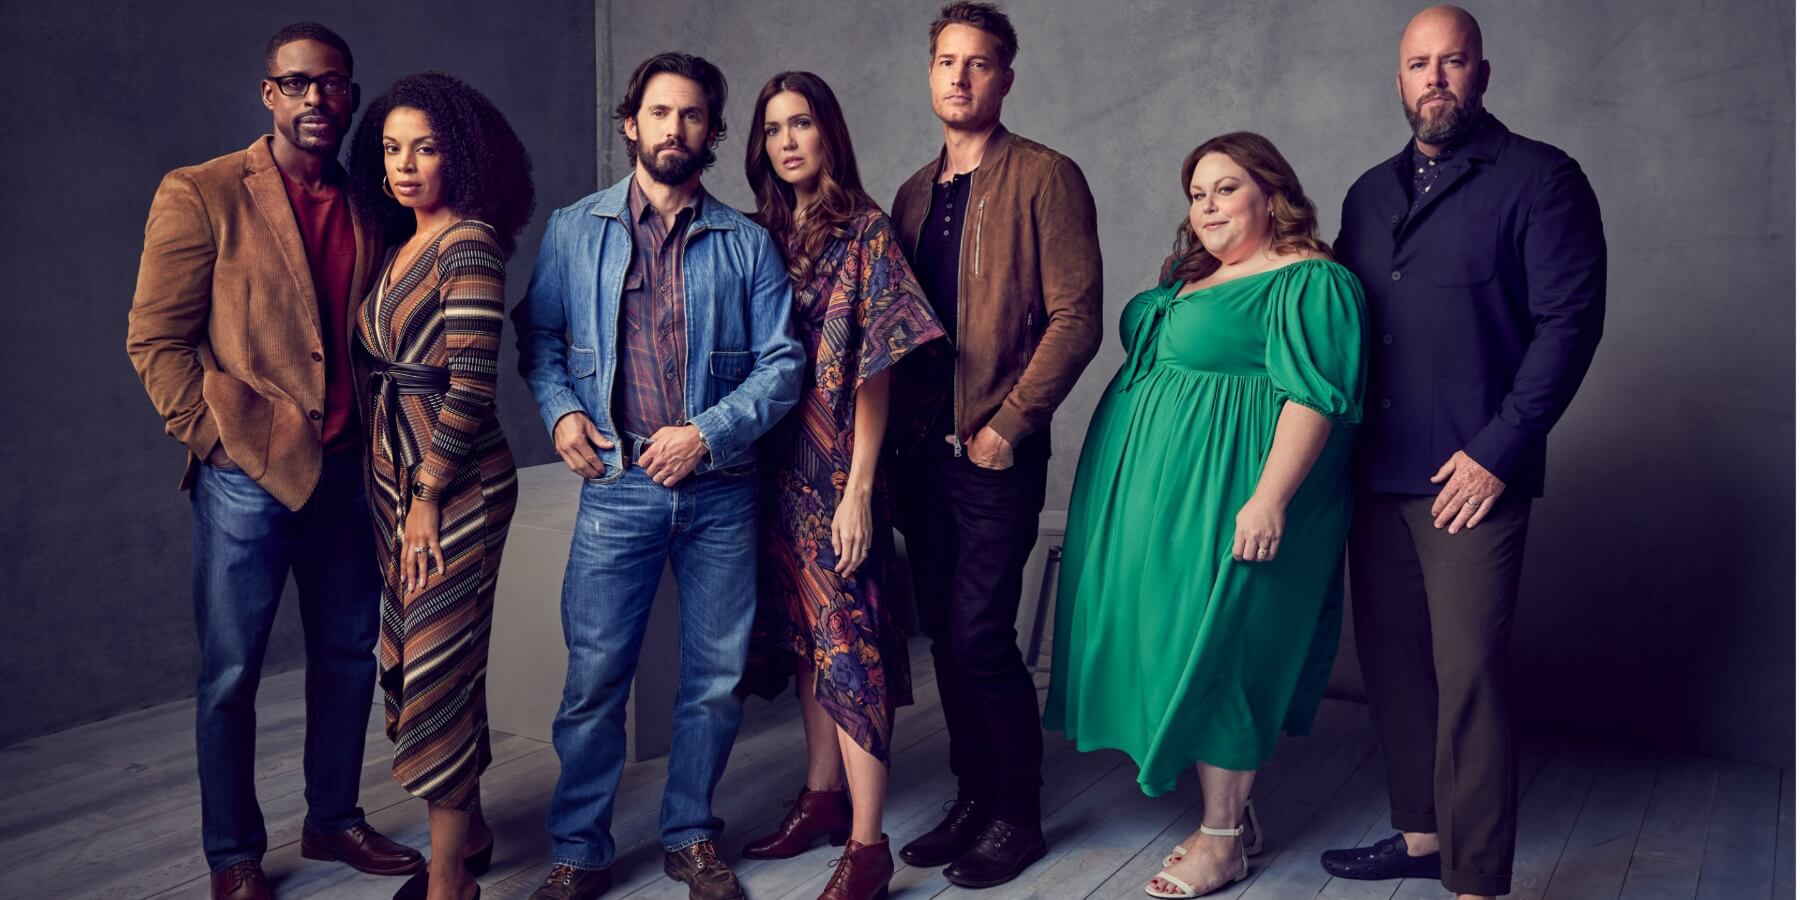 The cast of NBC's 'This Is Us' photographed during Season 6 includes Sterling K. Brown, Susan Kelechi Watson, Milo Ventimiglia, Mandy Moore, Justin Hartley, Chrissy Metz, and Chris Sullivan